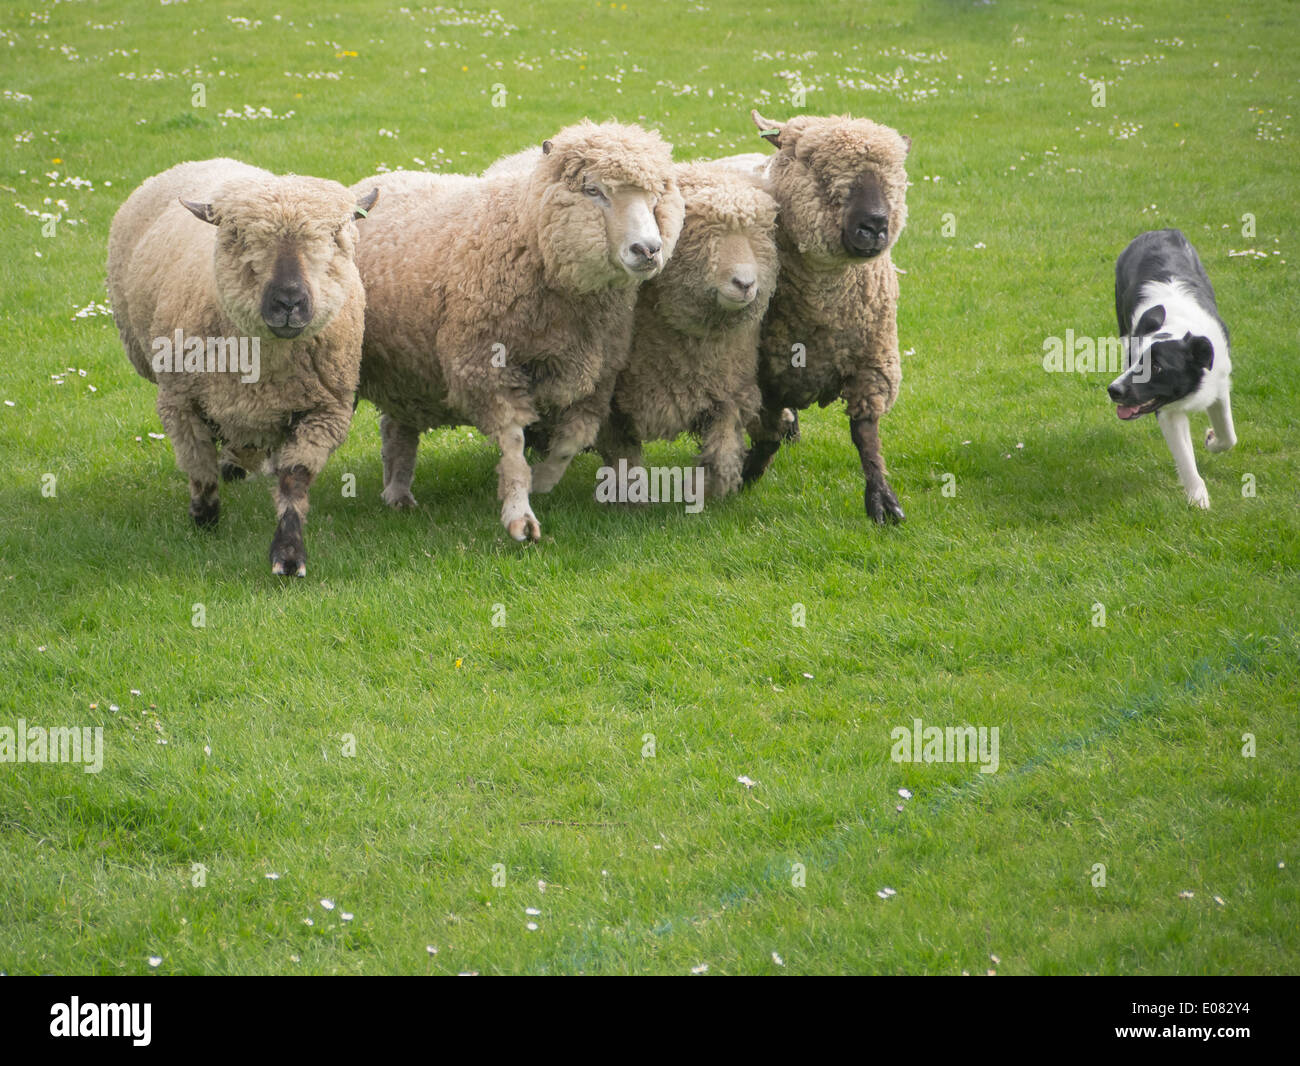 A Border Collie sheep dog rounds up sheep in a field Stock Photo